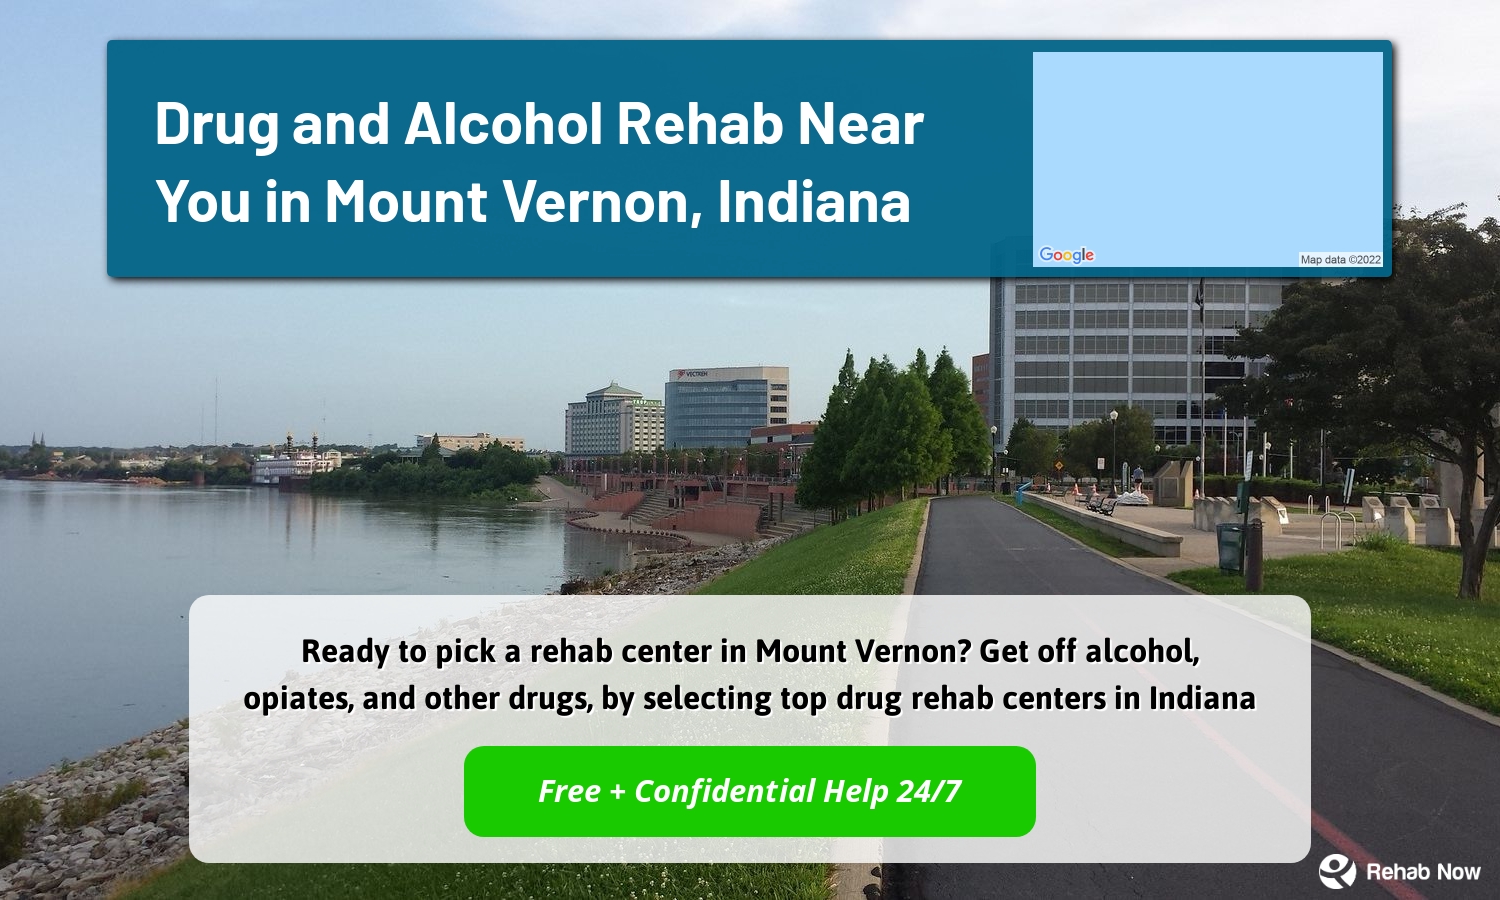 Ready to pick a rehab center in Mount Vernon? Get off alcohol, opiates, and other drugs, by selecting top drug rehab centers in Indiana